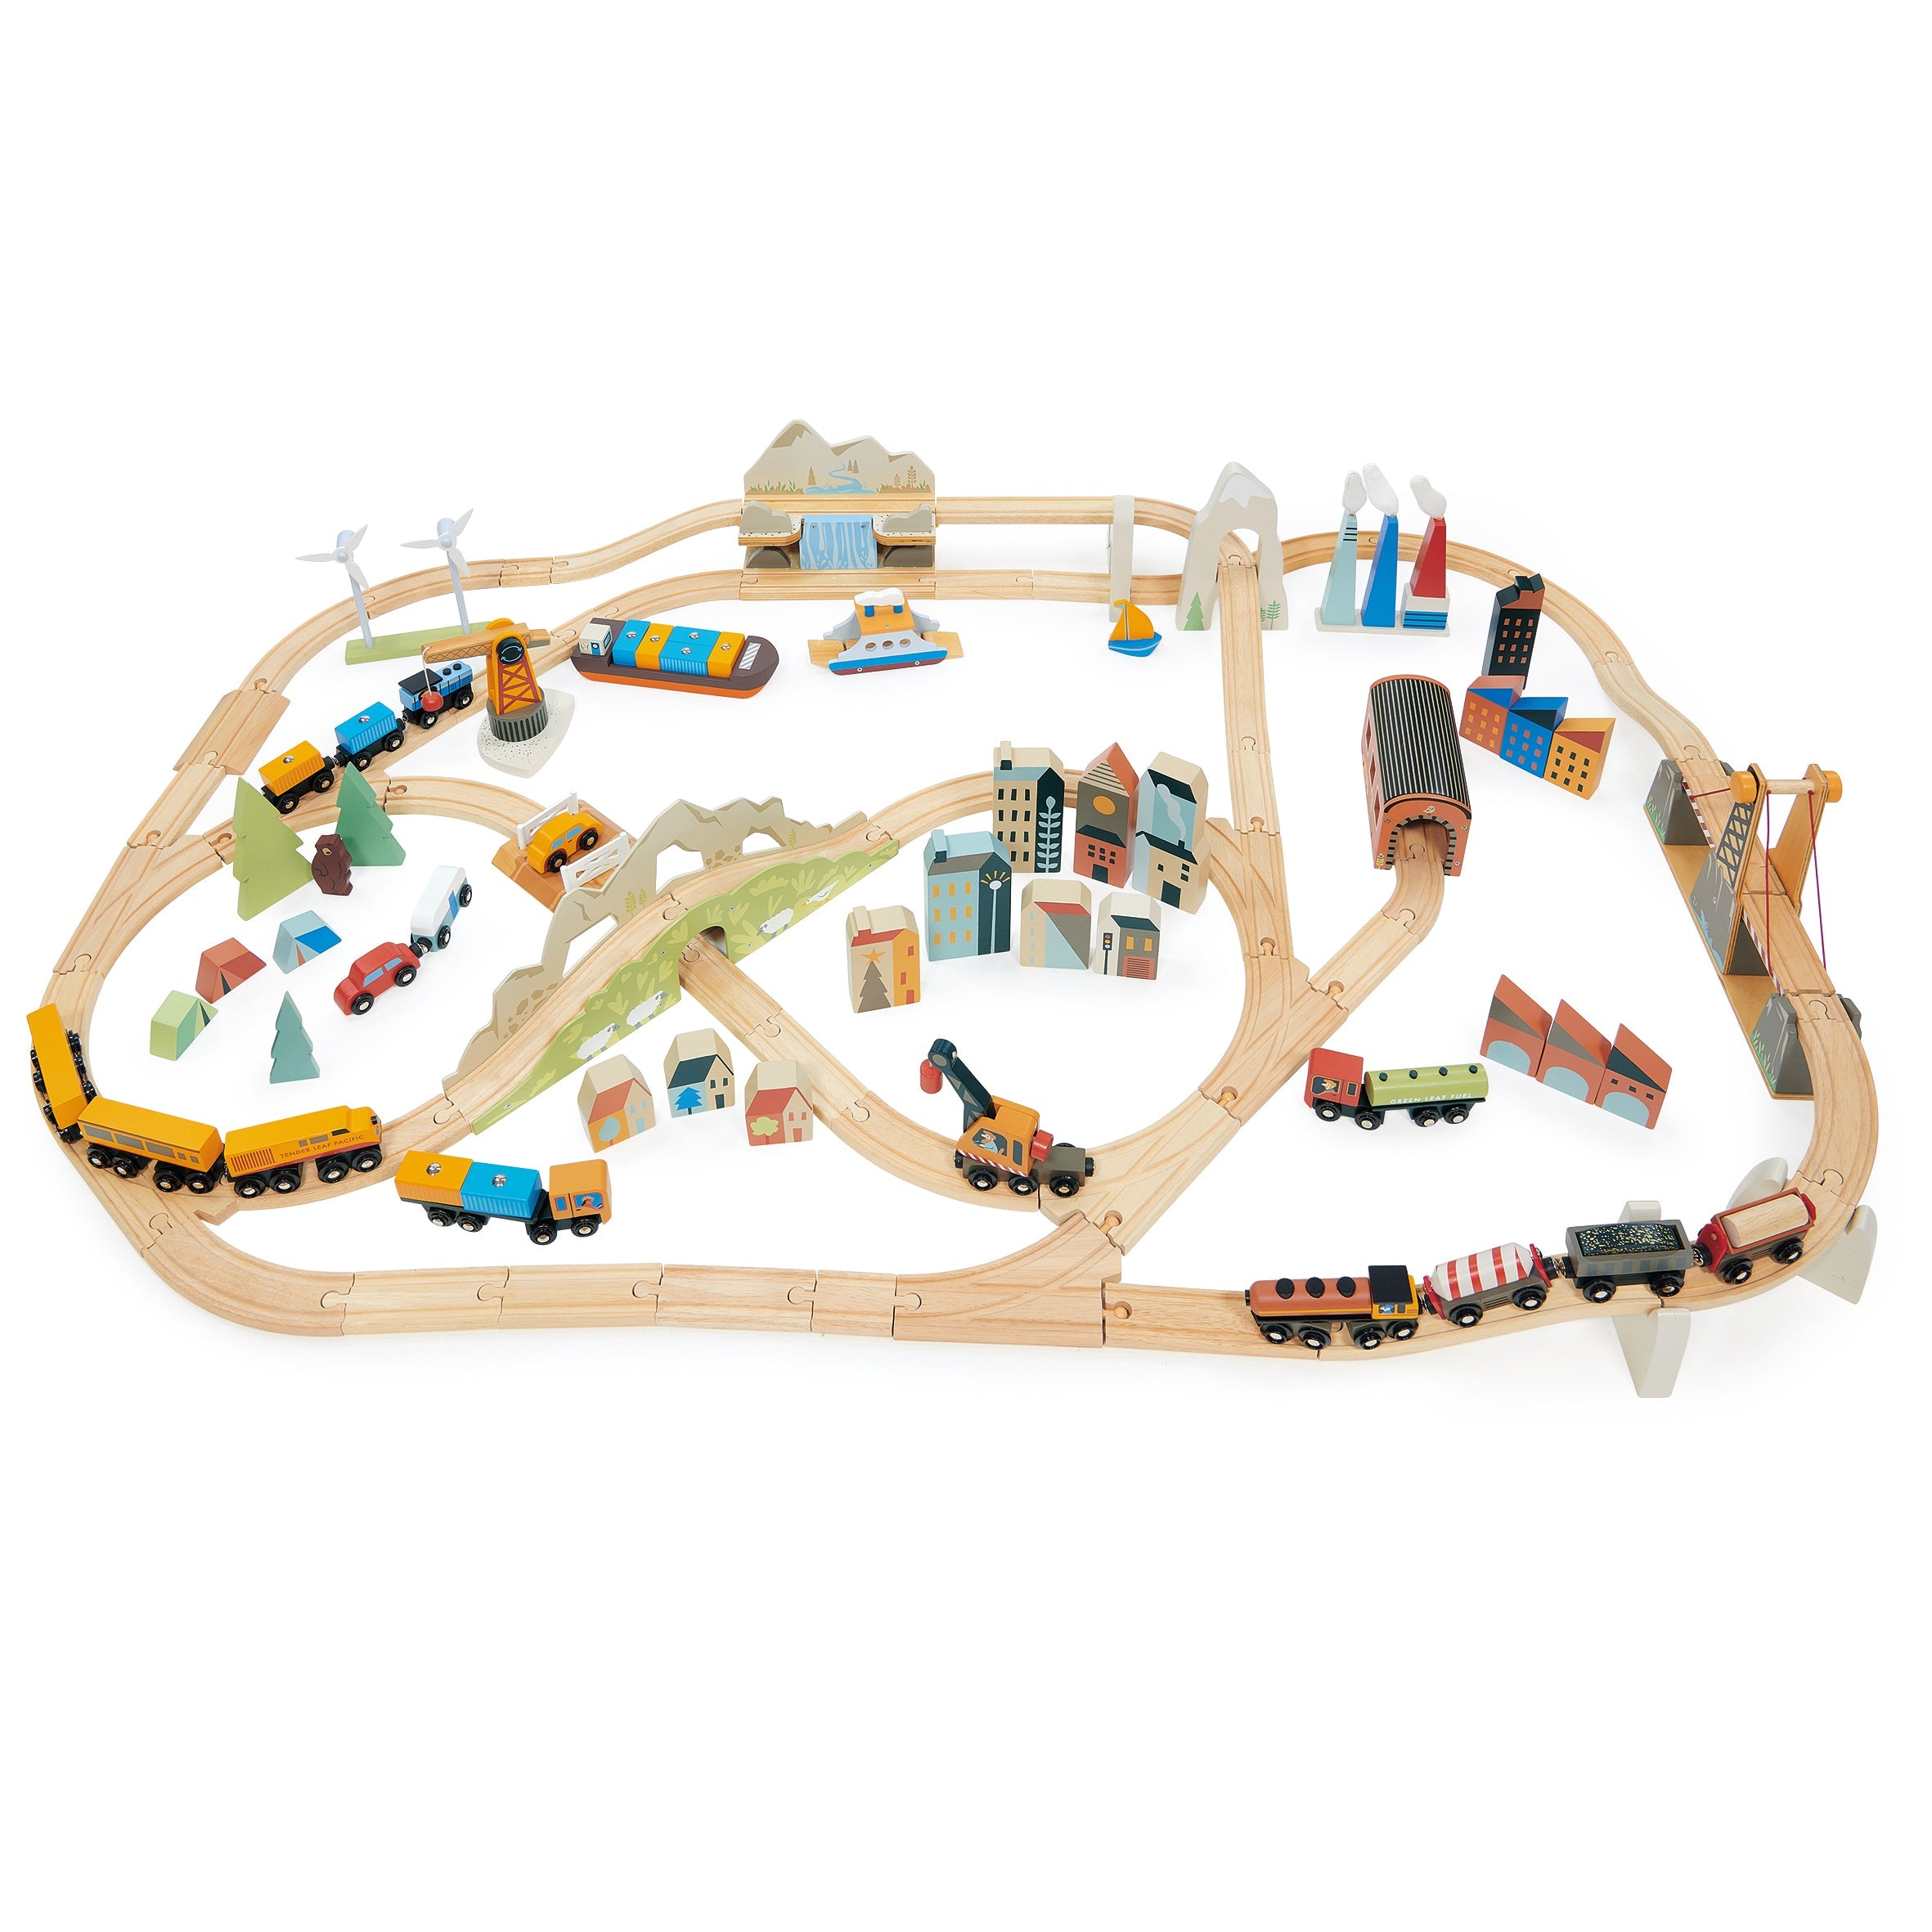 Tender Leaf Toys Mountain View Train Set - A modern twist on traditional train toys with 58 track pieces and various accessories for creating Industrial, Town, and Holiday landscapes. Perfect for endless imaginative play!